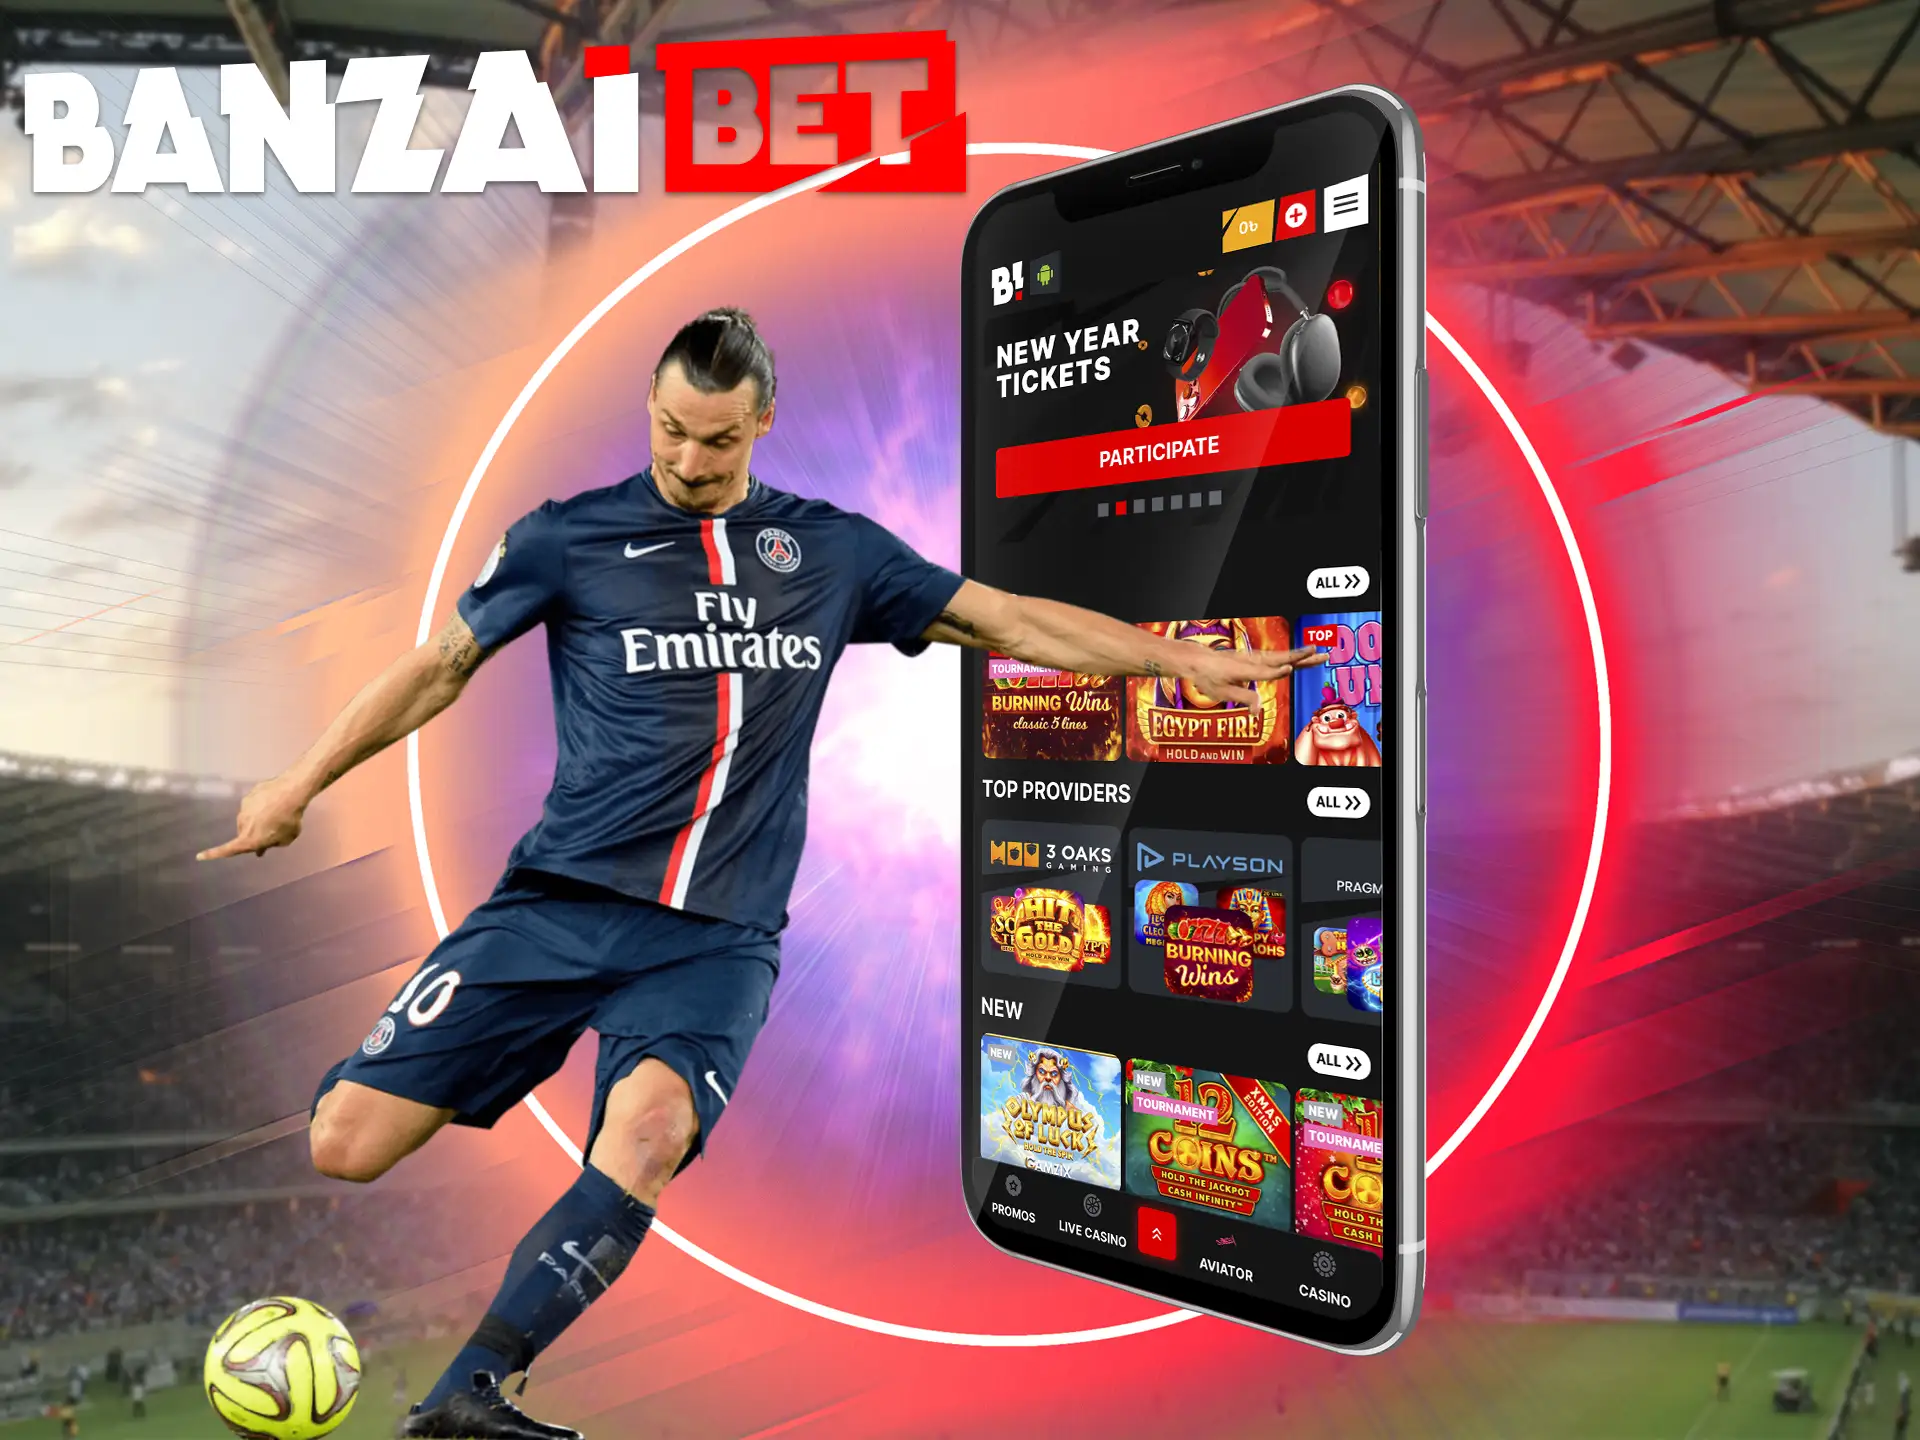 Dive into an abundance of betting types right on your smartphone, anywhere you want, thanks to the Banzai App.